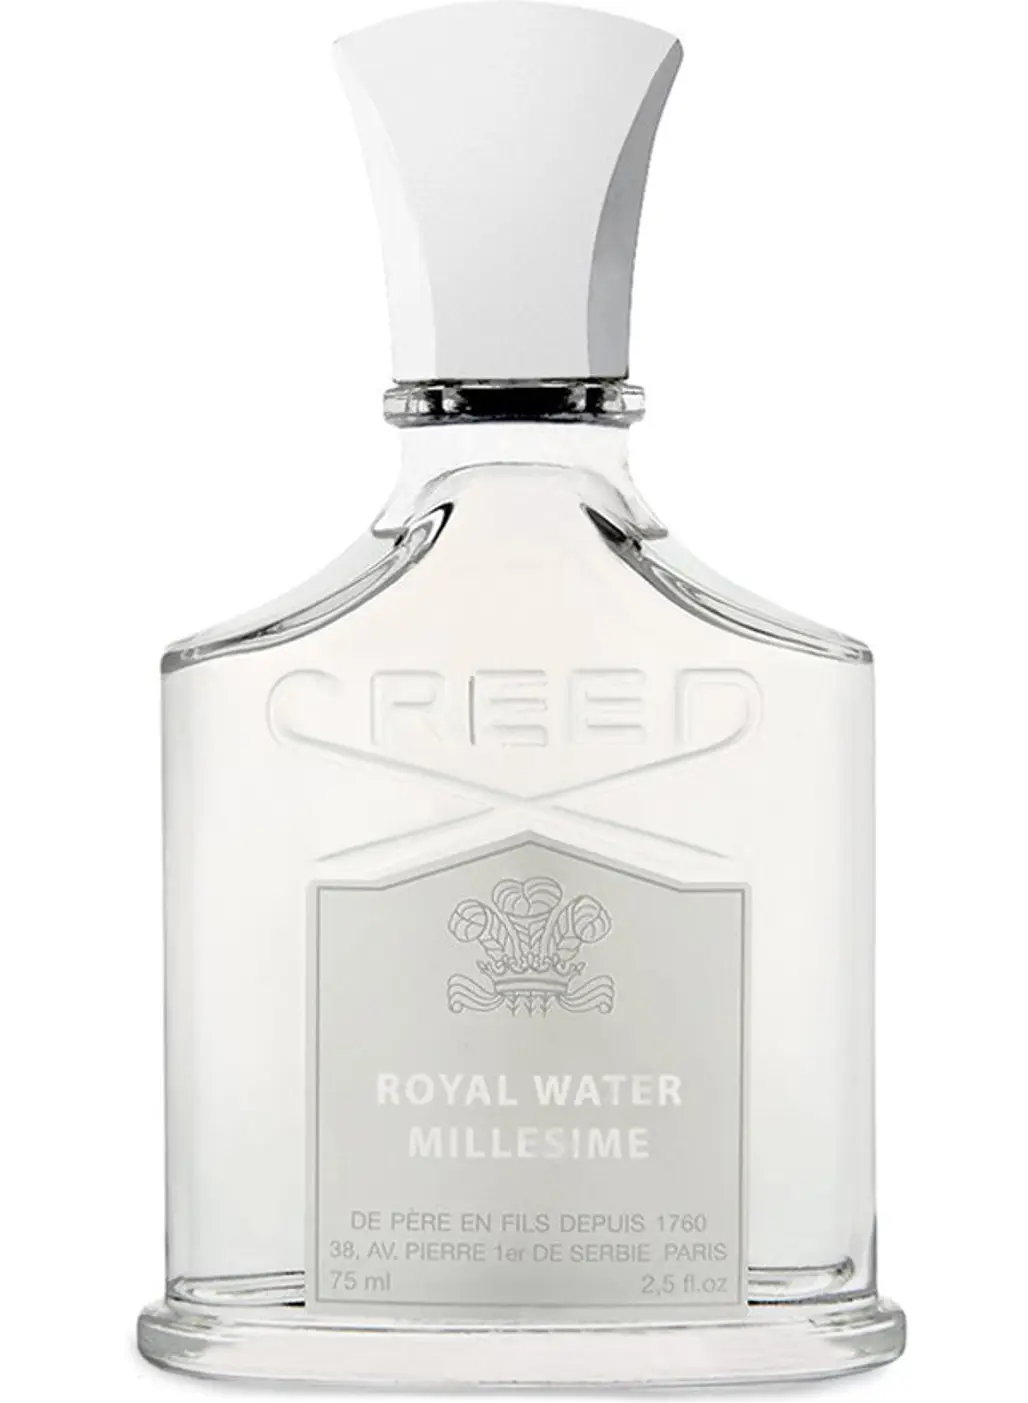 Victoria Beckham Wears Creed Royal Water